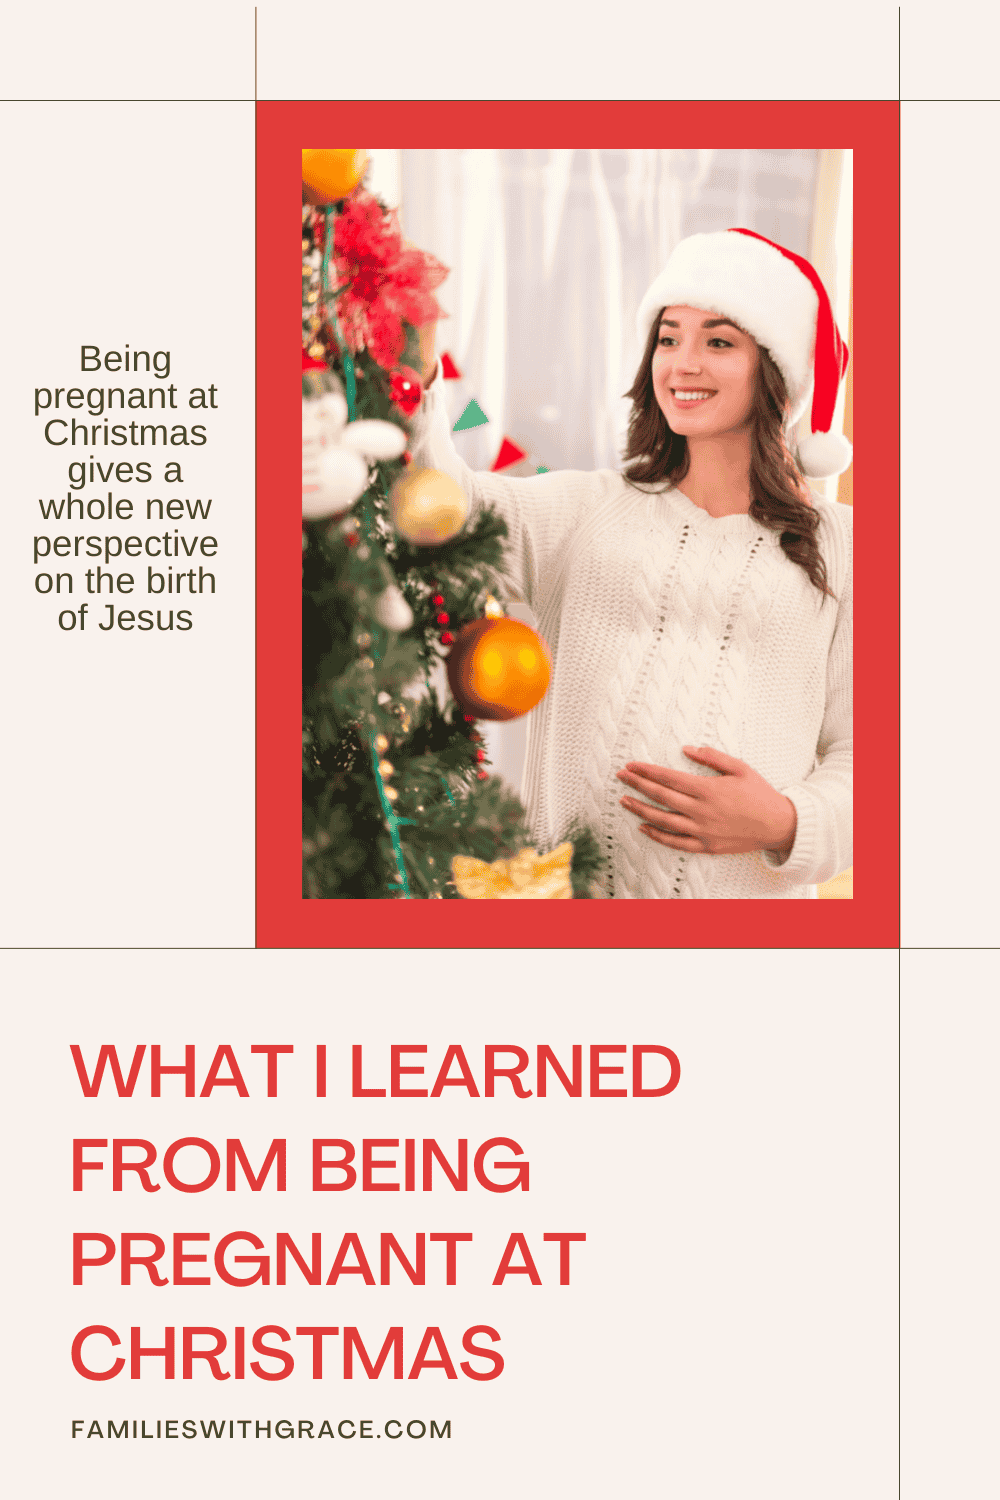 What I learned from being pregnant at Christmas